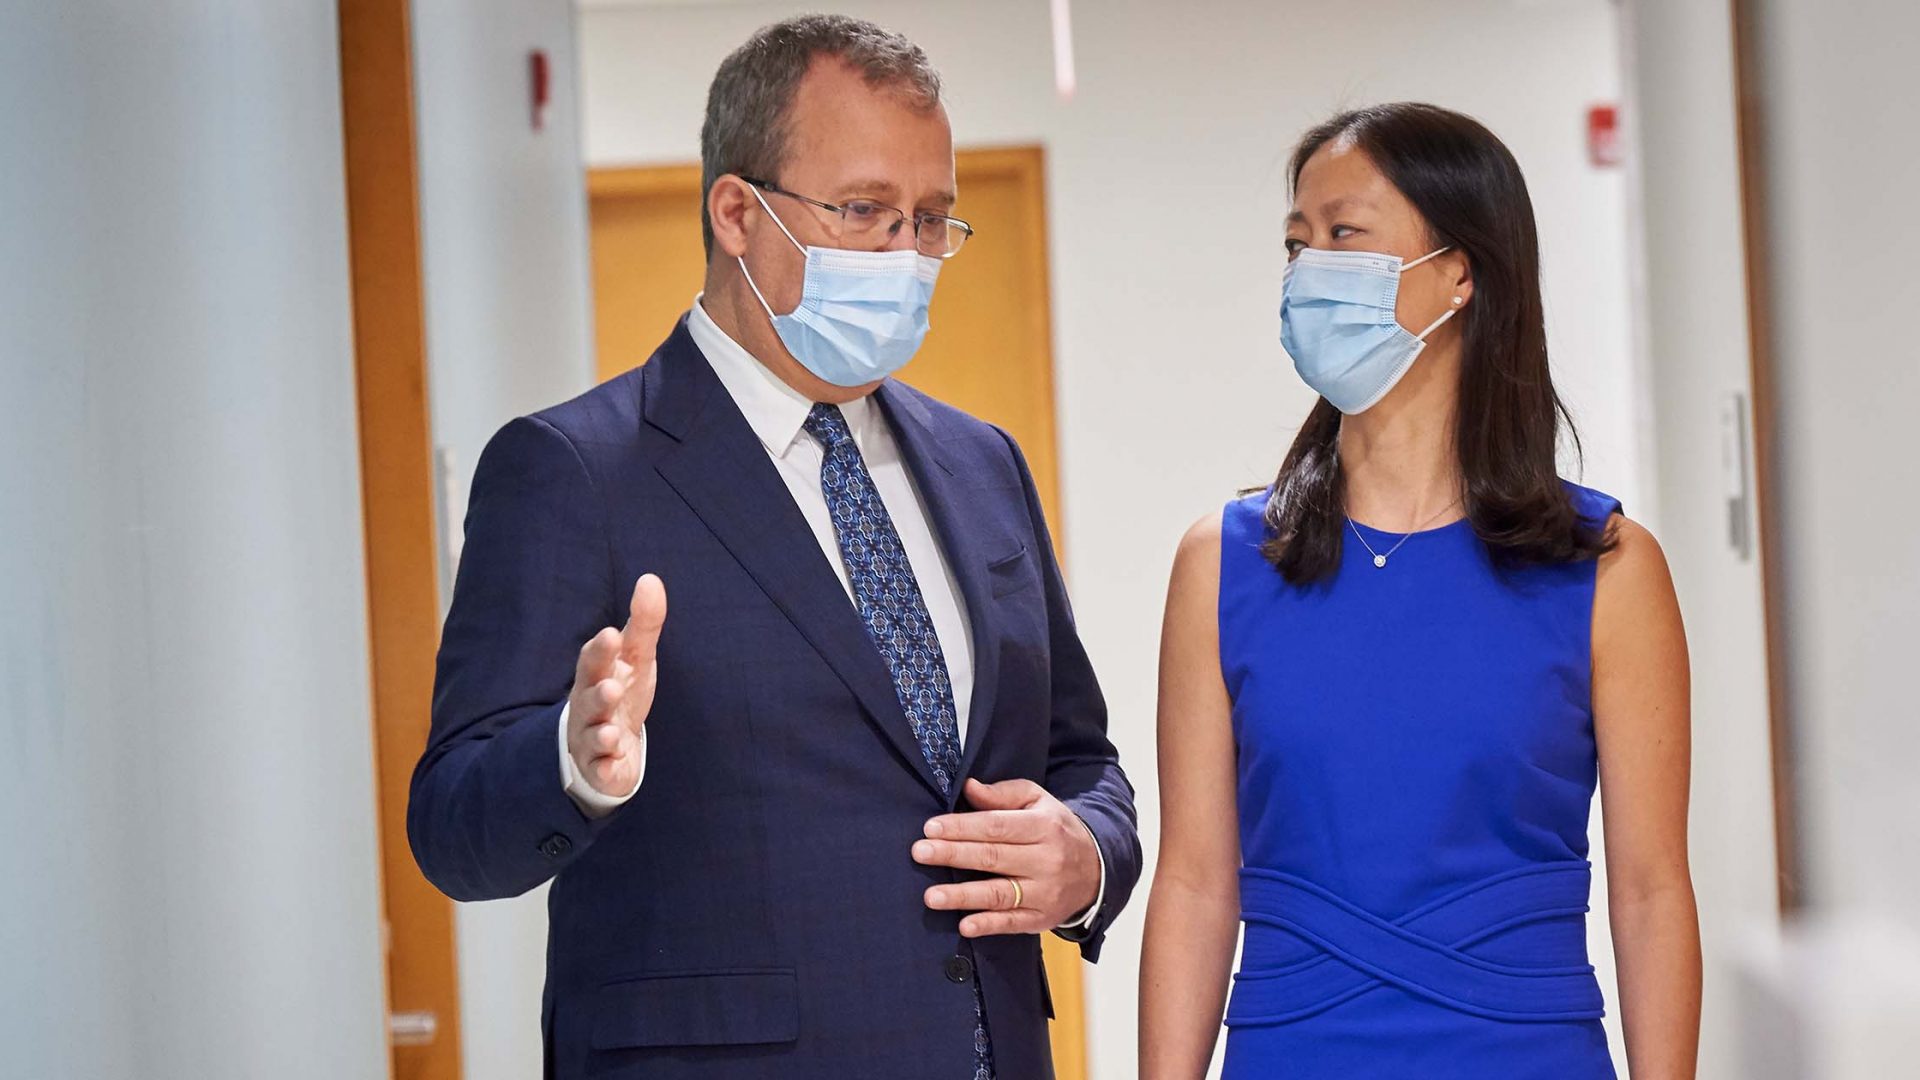 Dr. Feza Remzi and Dr. Shannon Chang Wearing Face Masks and Chatting in Hallway